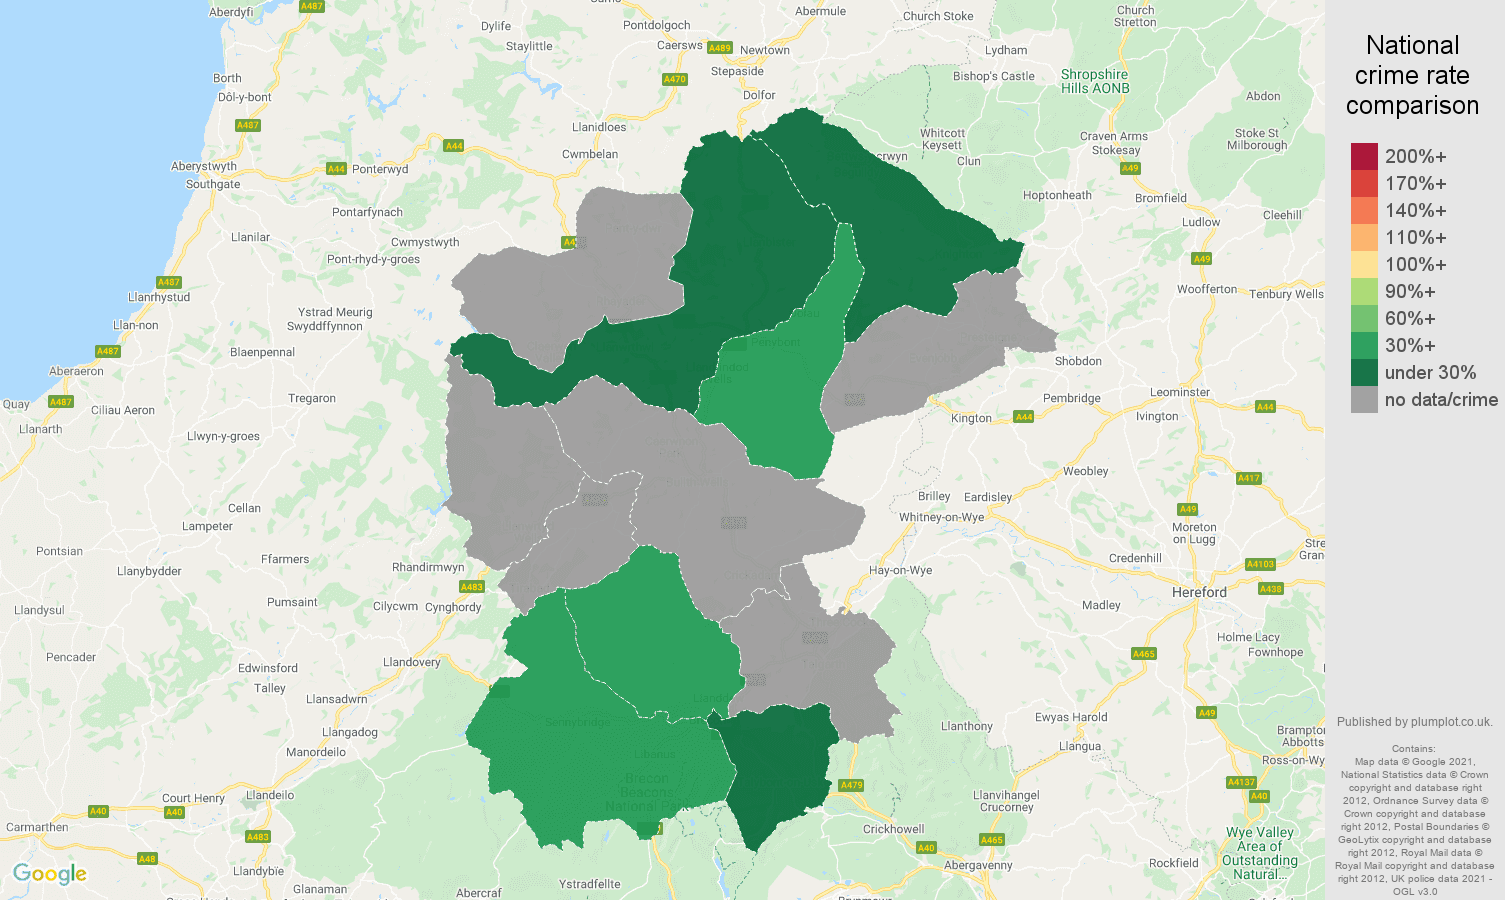 Llandrindod Wells bicycle theft crime rate comparison map